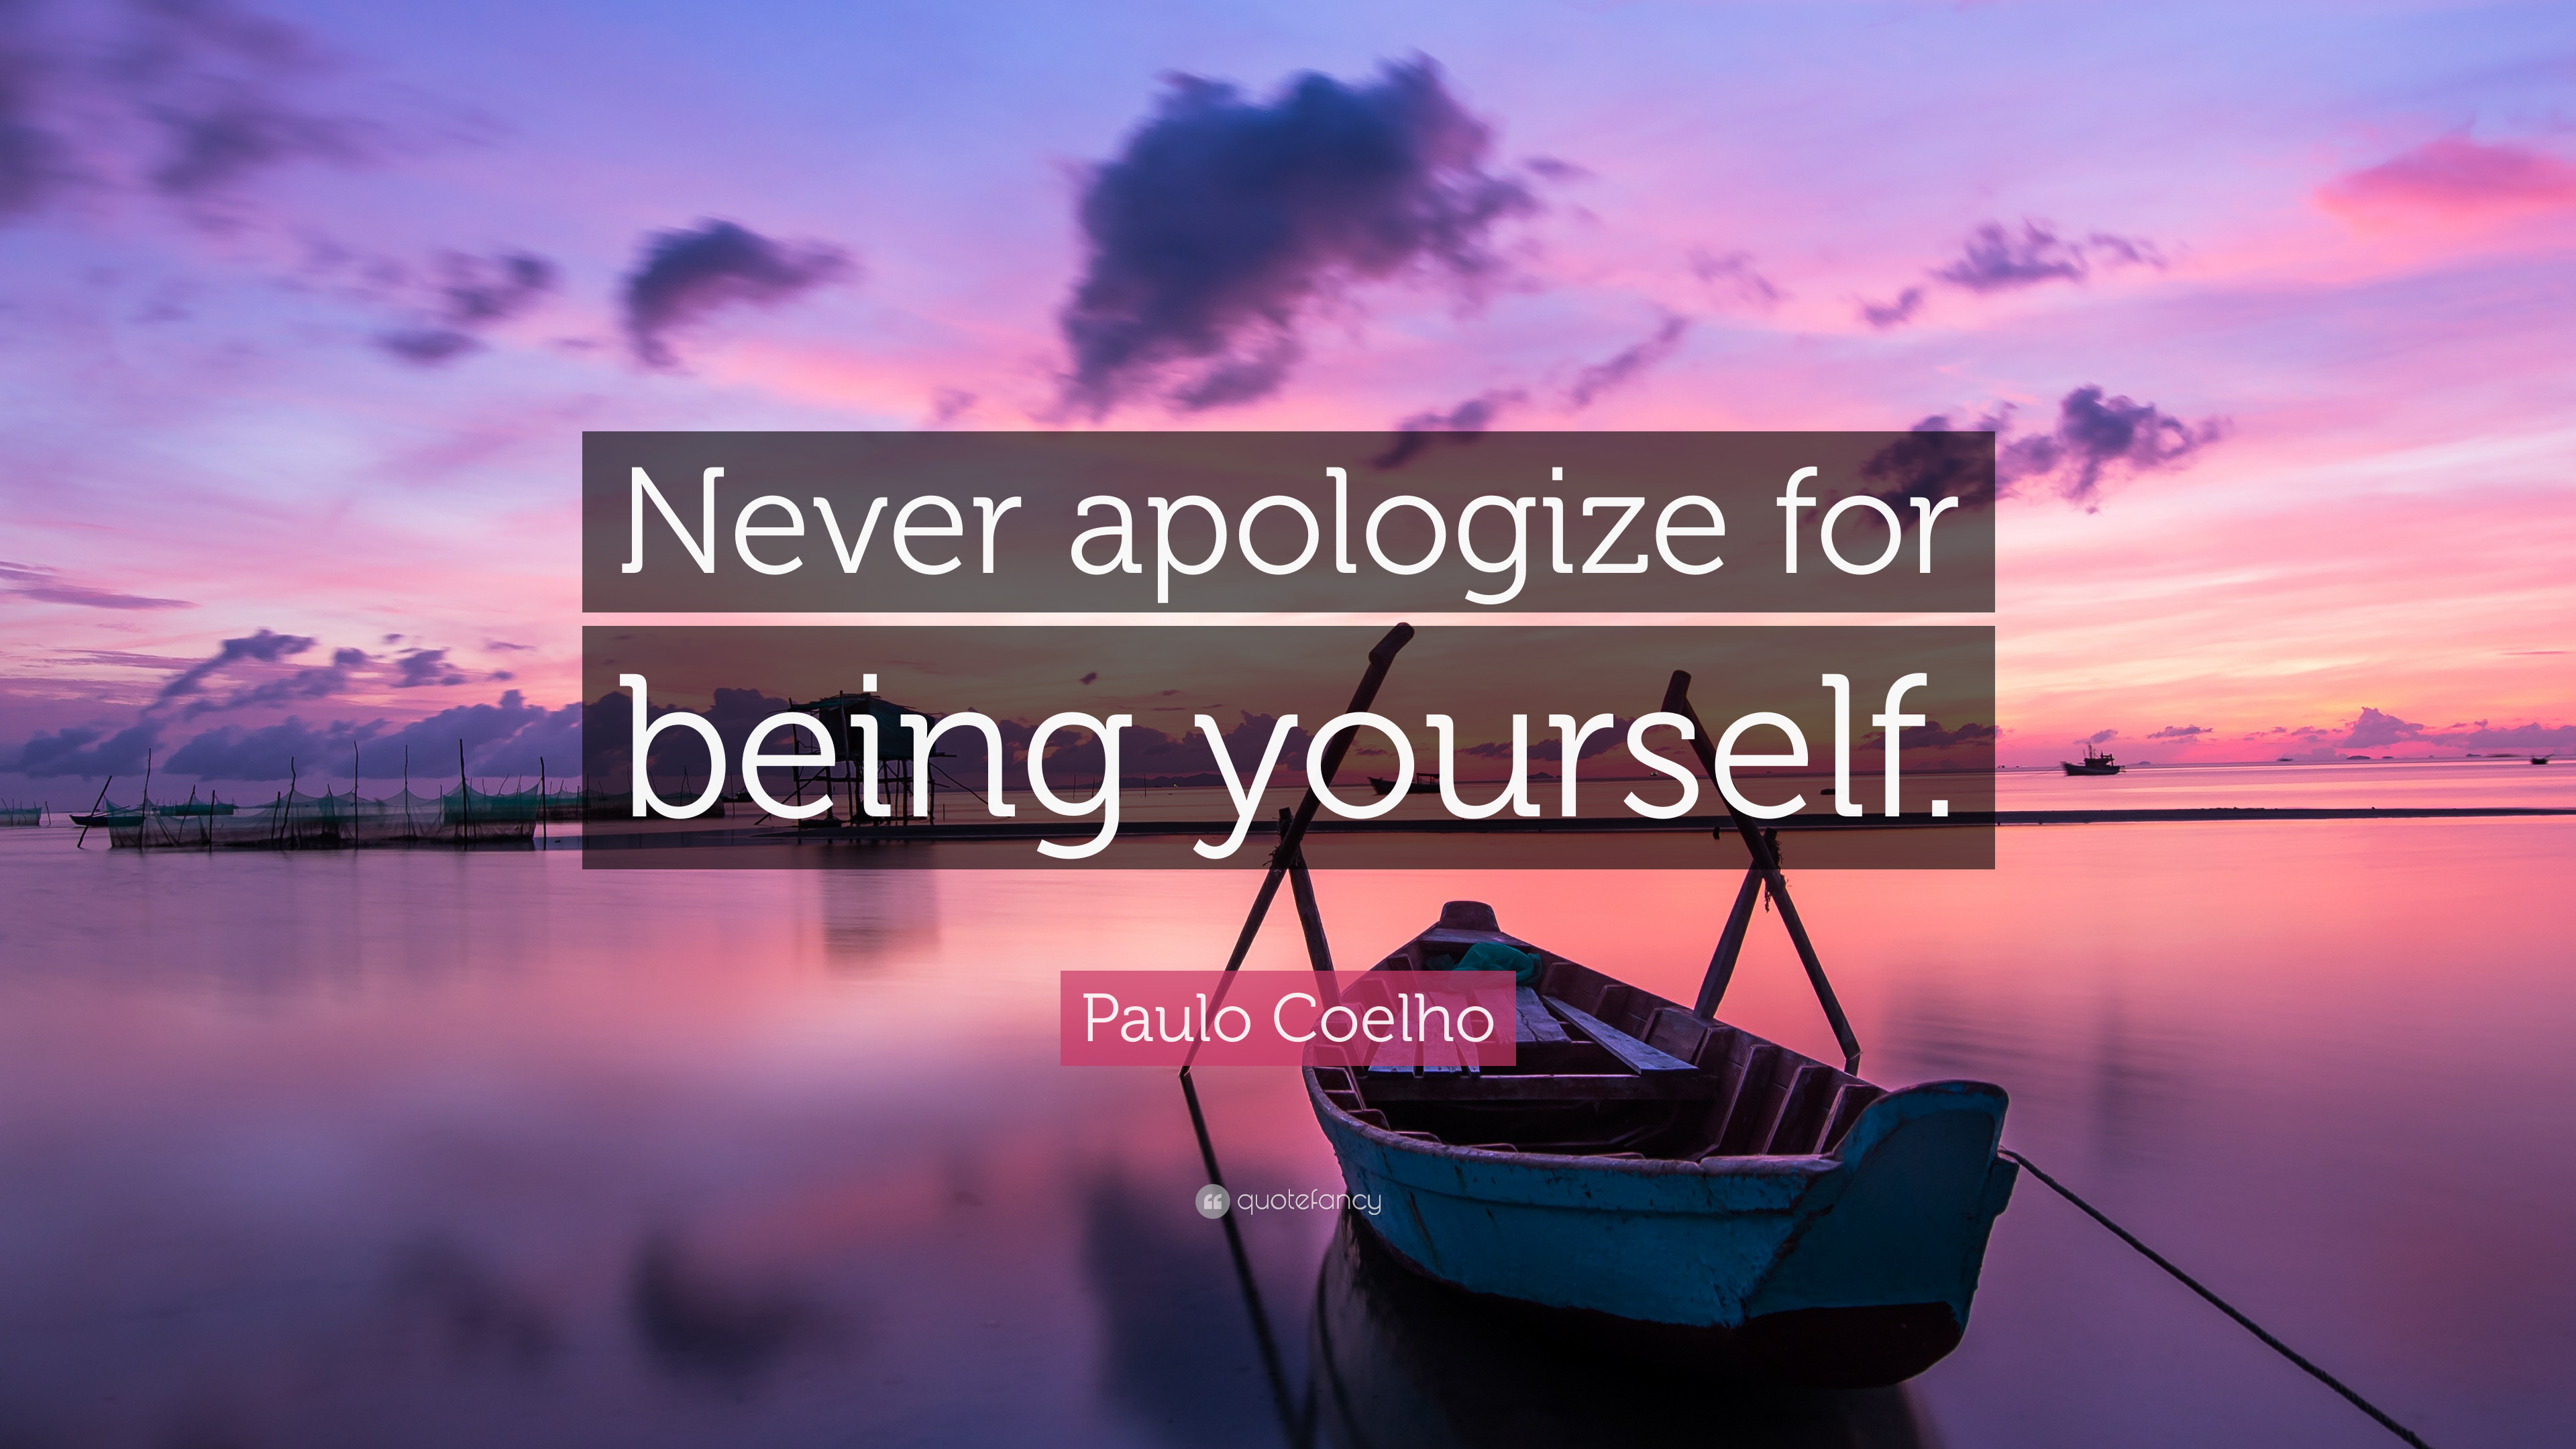 Paulo coelho quote ânever apologize for being yourselfâ